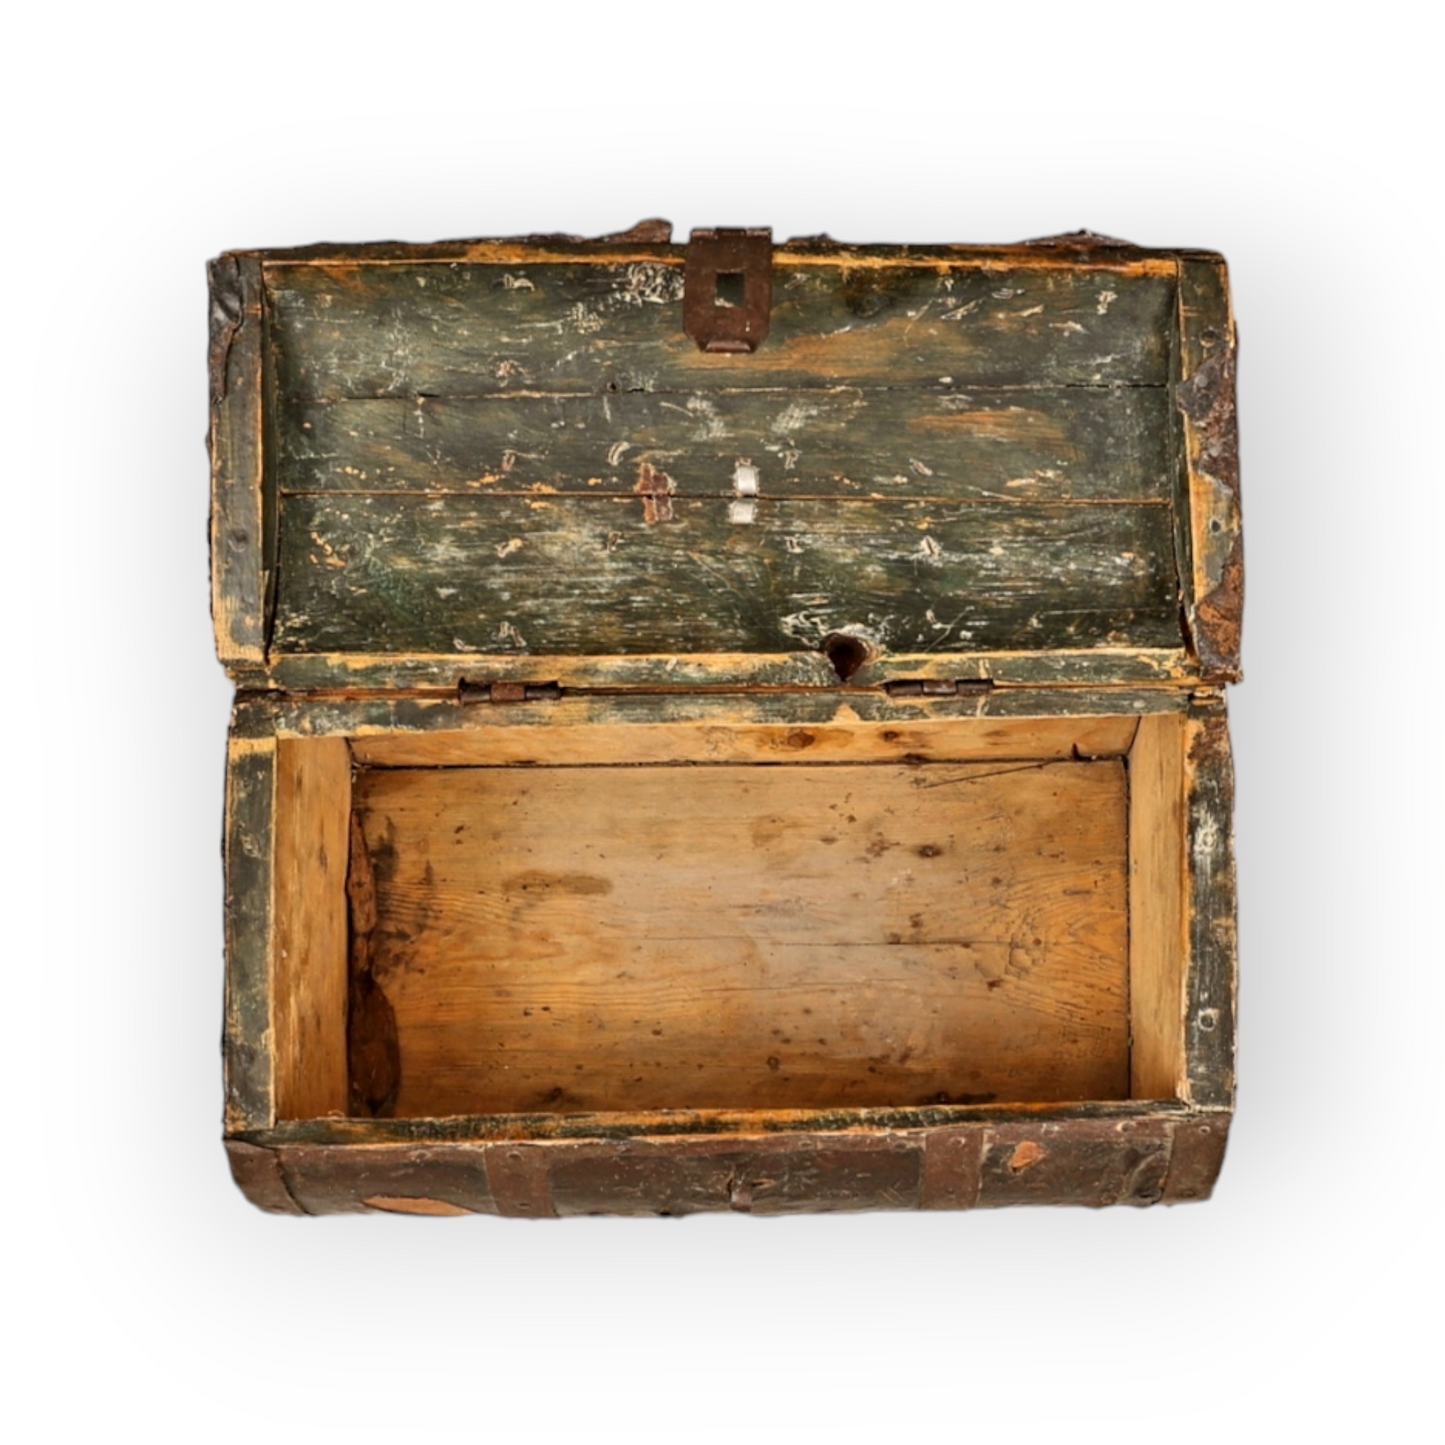 Early 17thC Scandinavian Antique Iron and Leather Bound Table Box of Unusual Form, circa 1600